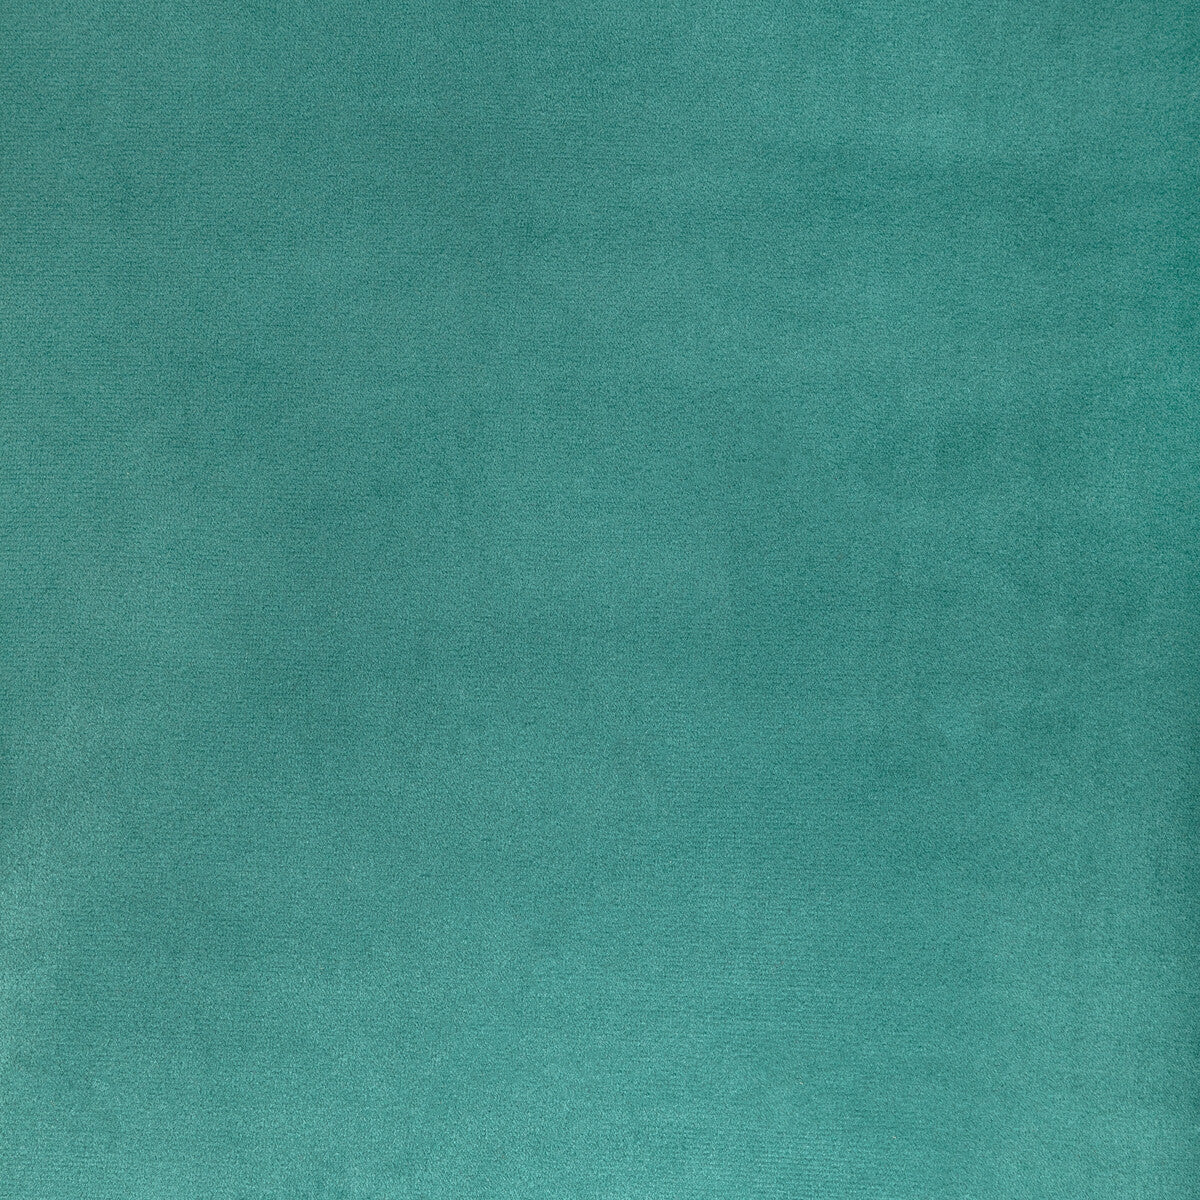 Rocco Velvet fabric in pool color - pattern 36652.13.0 - by Kravet Contract